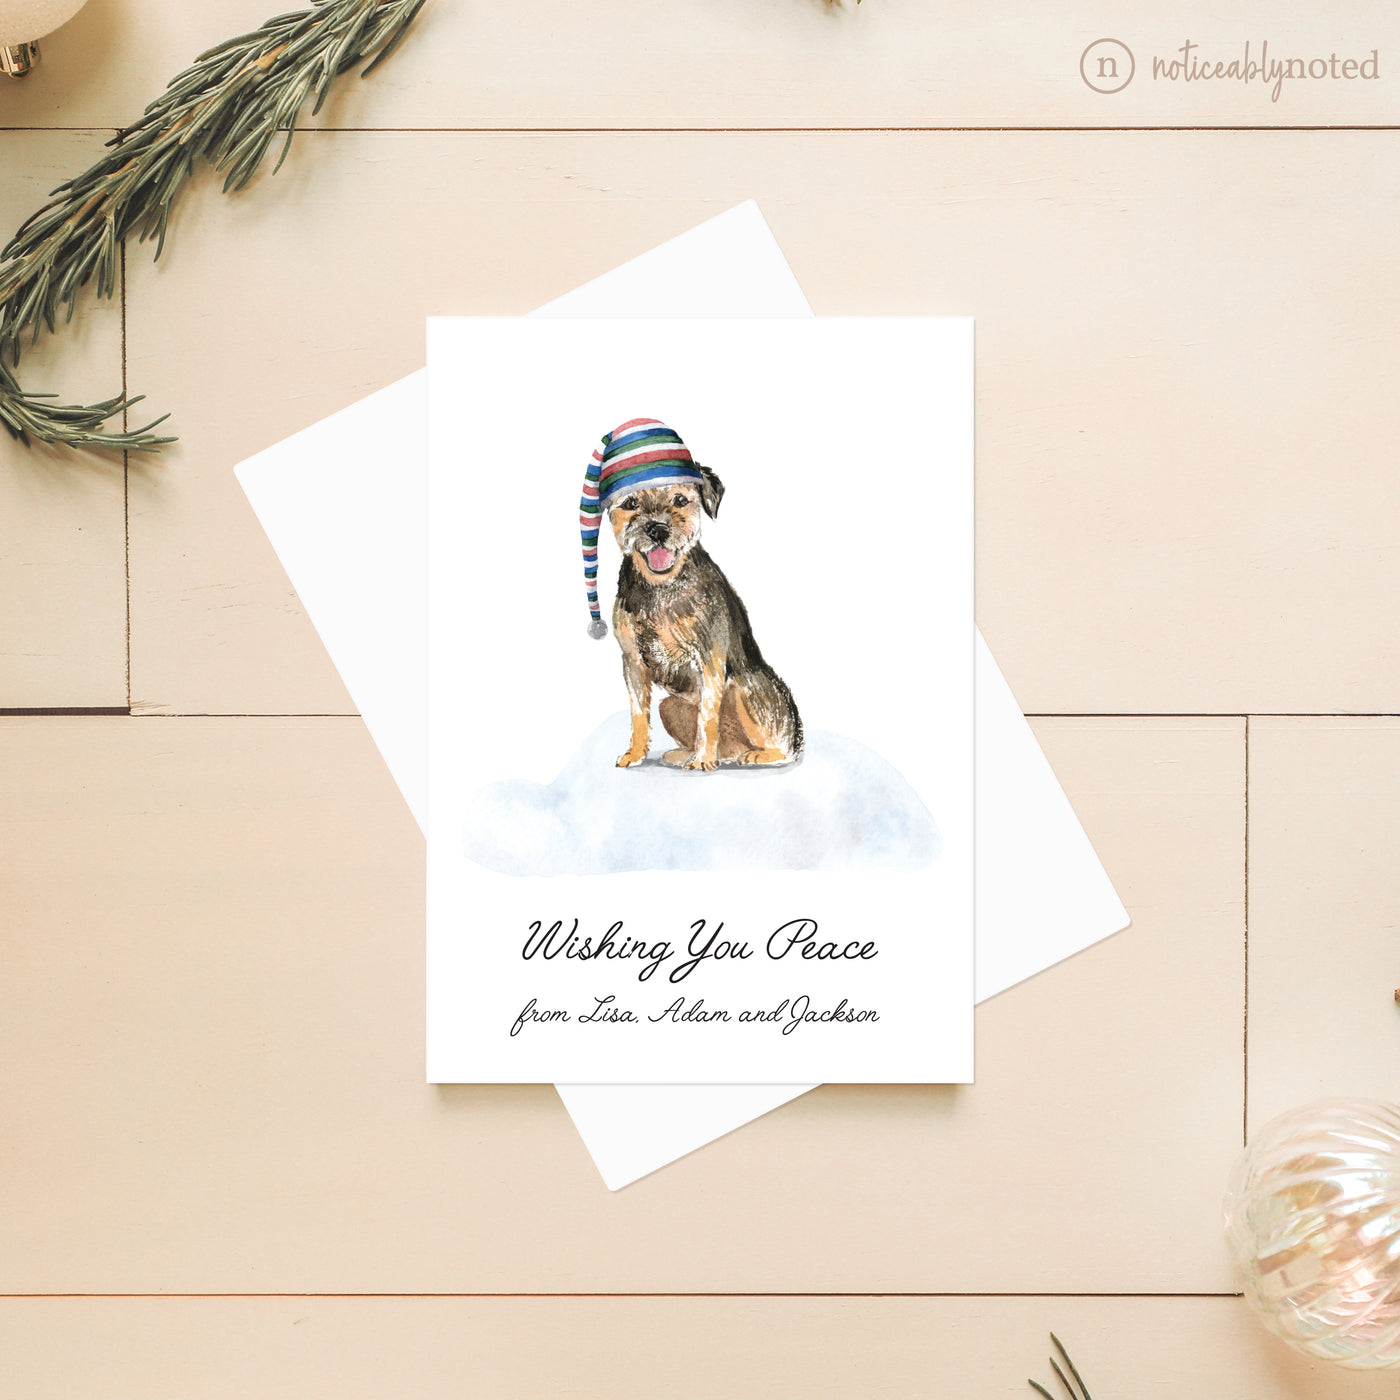 Border Terrier Dog Christmas Card | Noticeably Noted